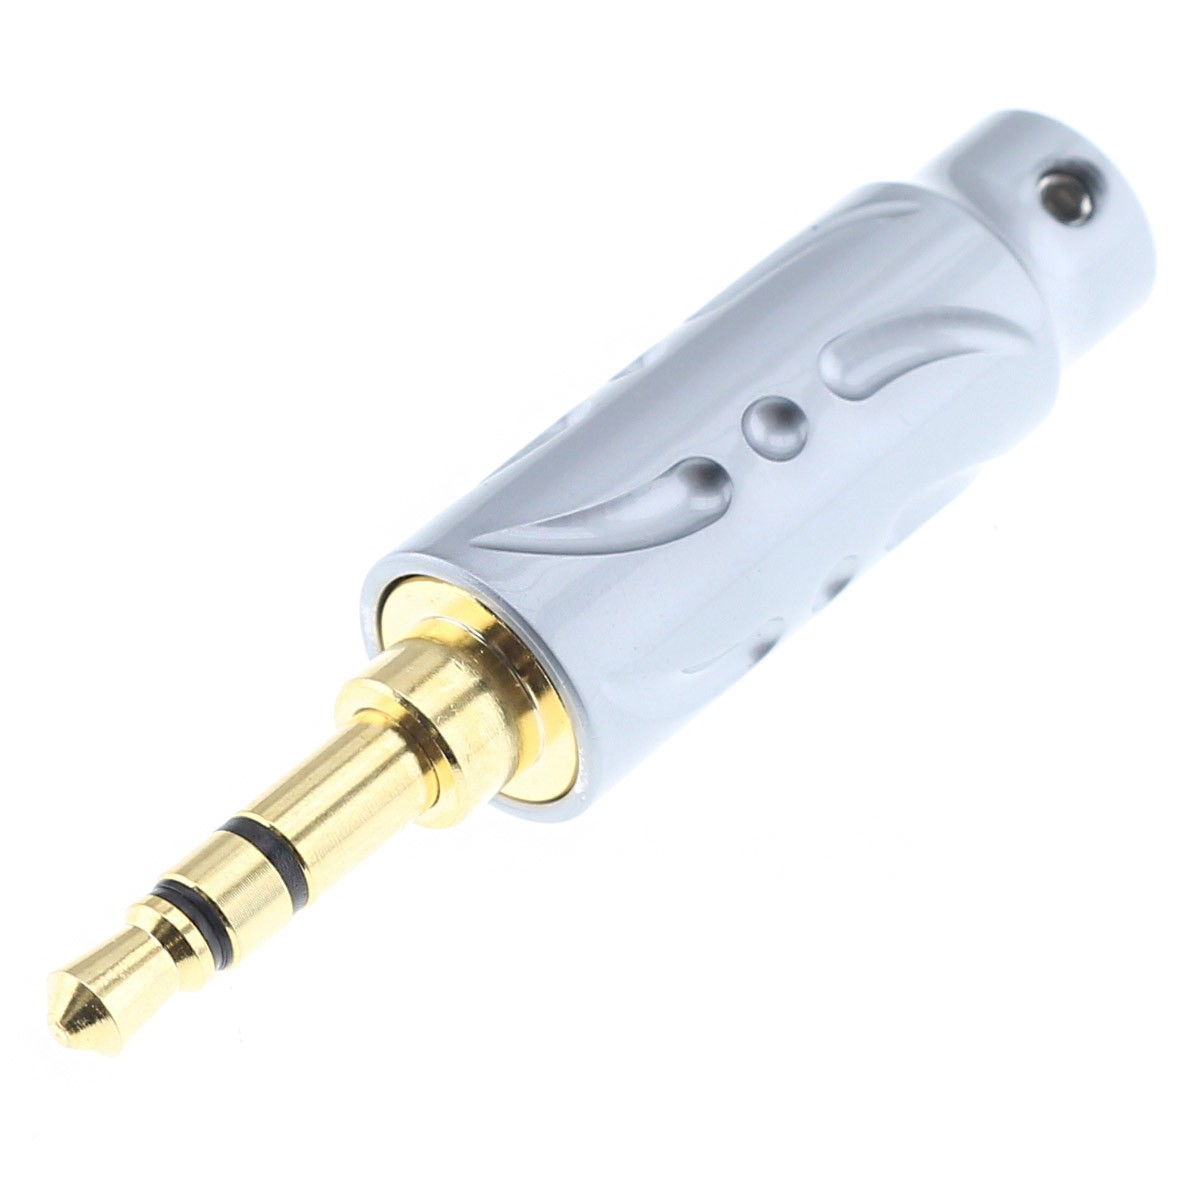 VIBORG VH302G Stereo Jack 3.5mm Connector Gold Plated Ø6mm